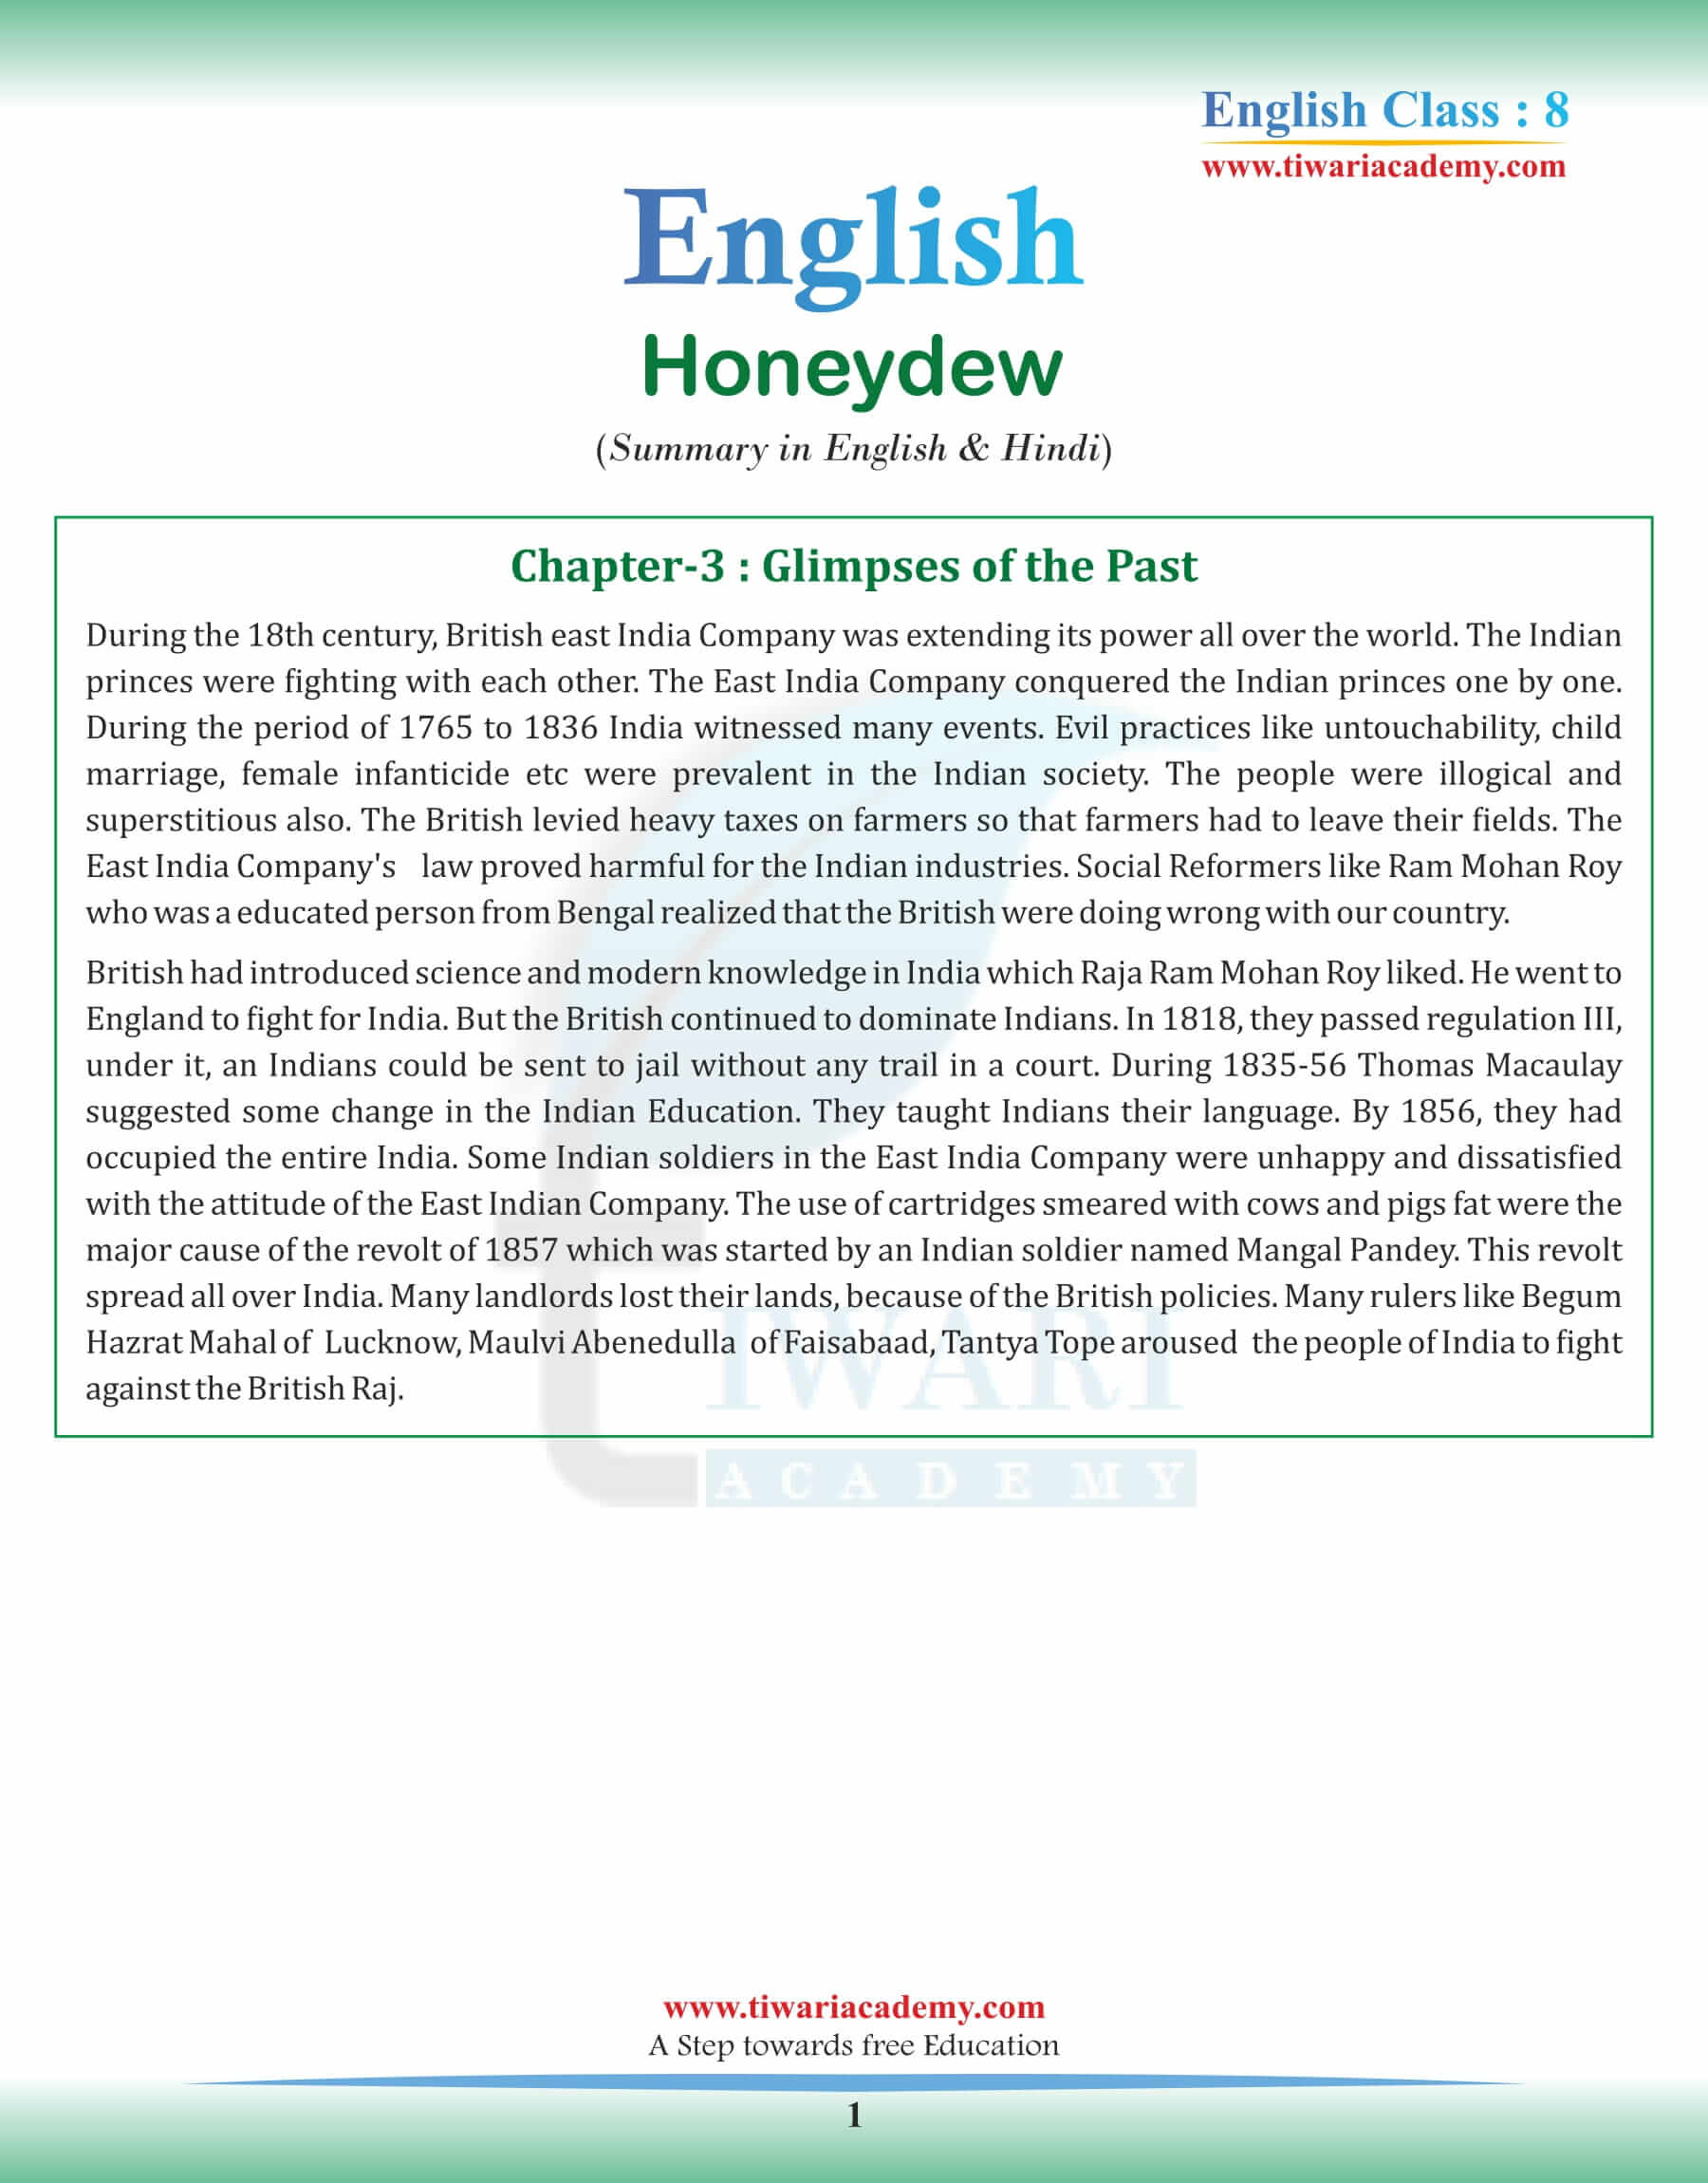 Class 8 English Chapter 3 Summary in English